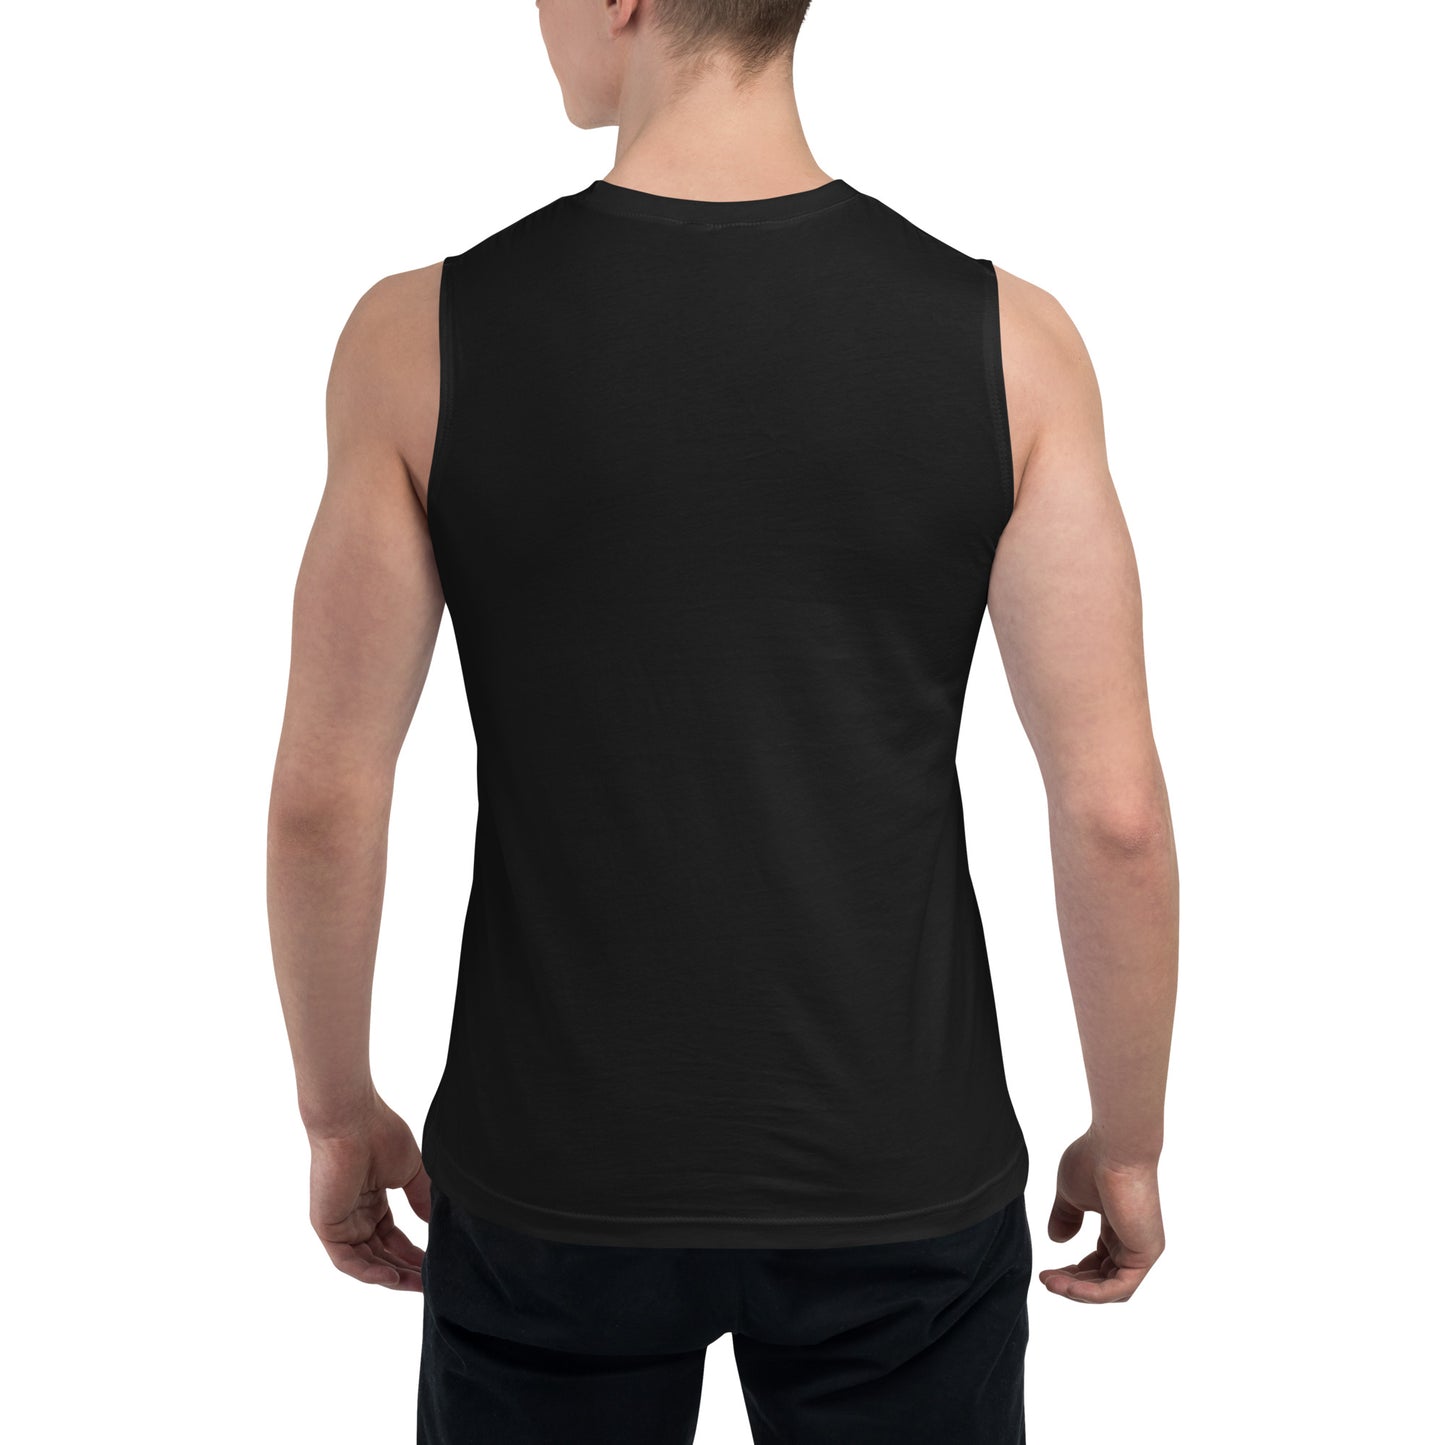 STAY FOCUSED Muscle Shirt